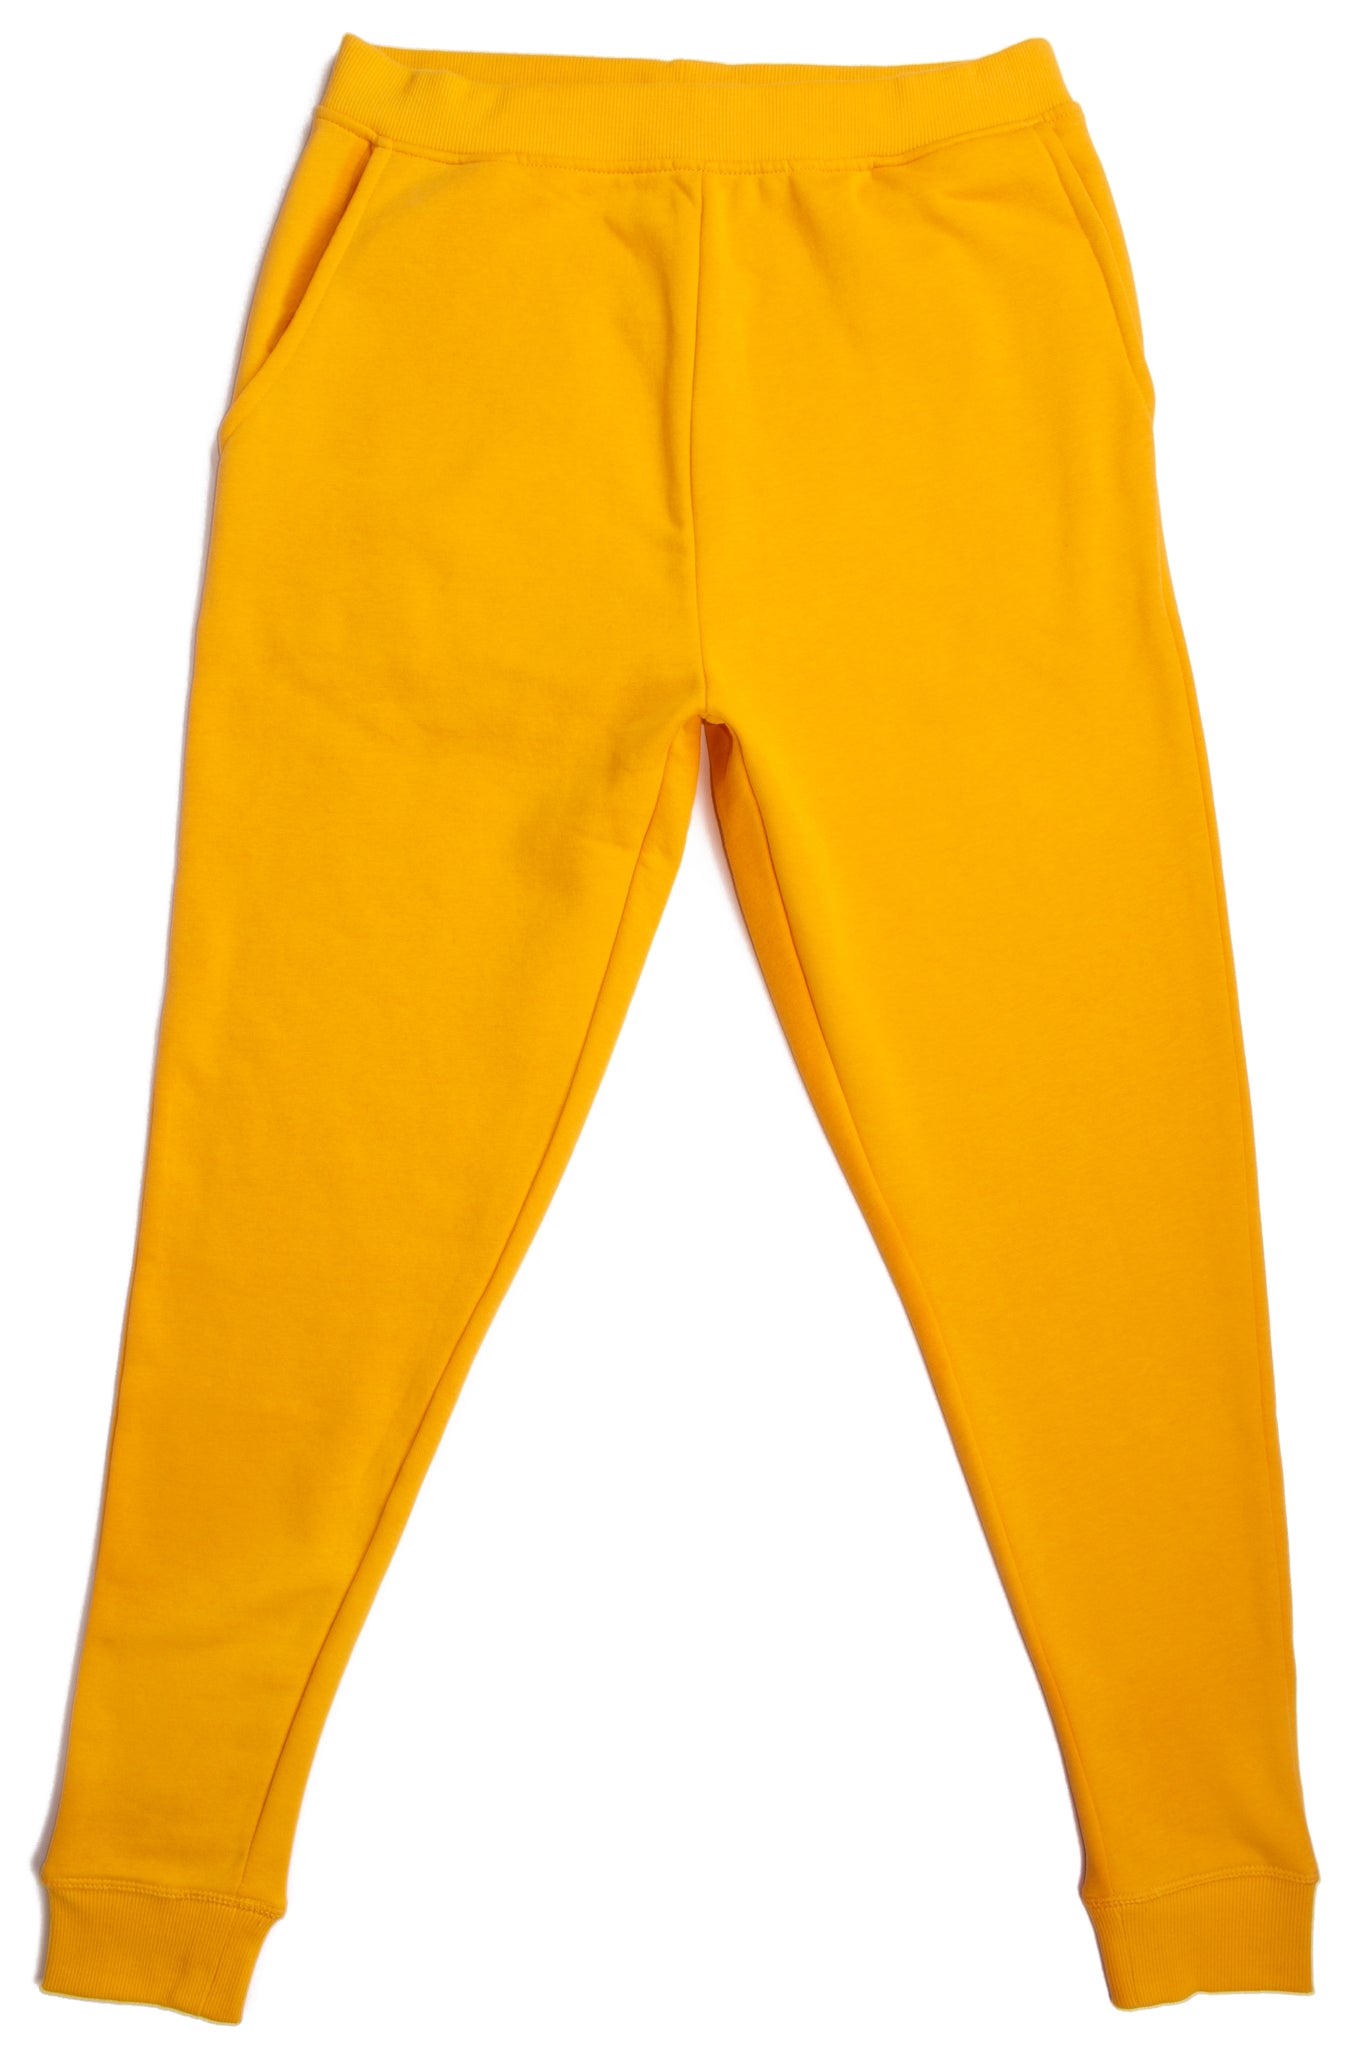 HERO-5020R Unisex Joggers - Gold (Relaxed Fit)